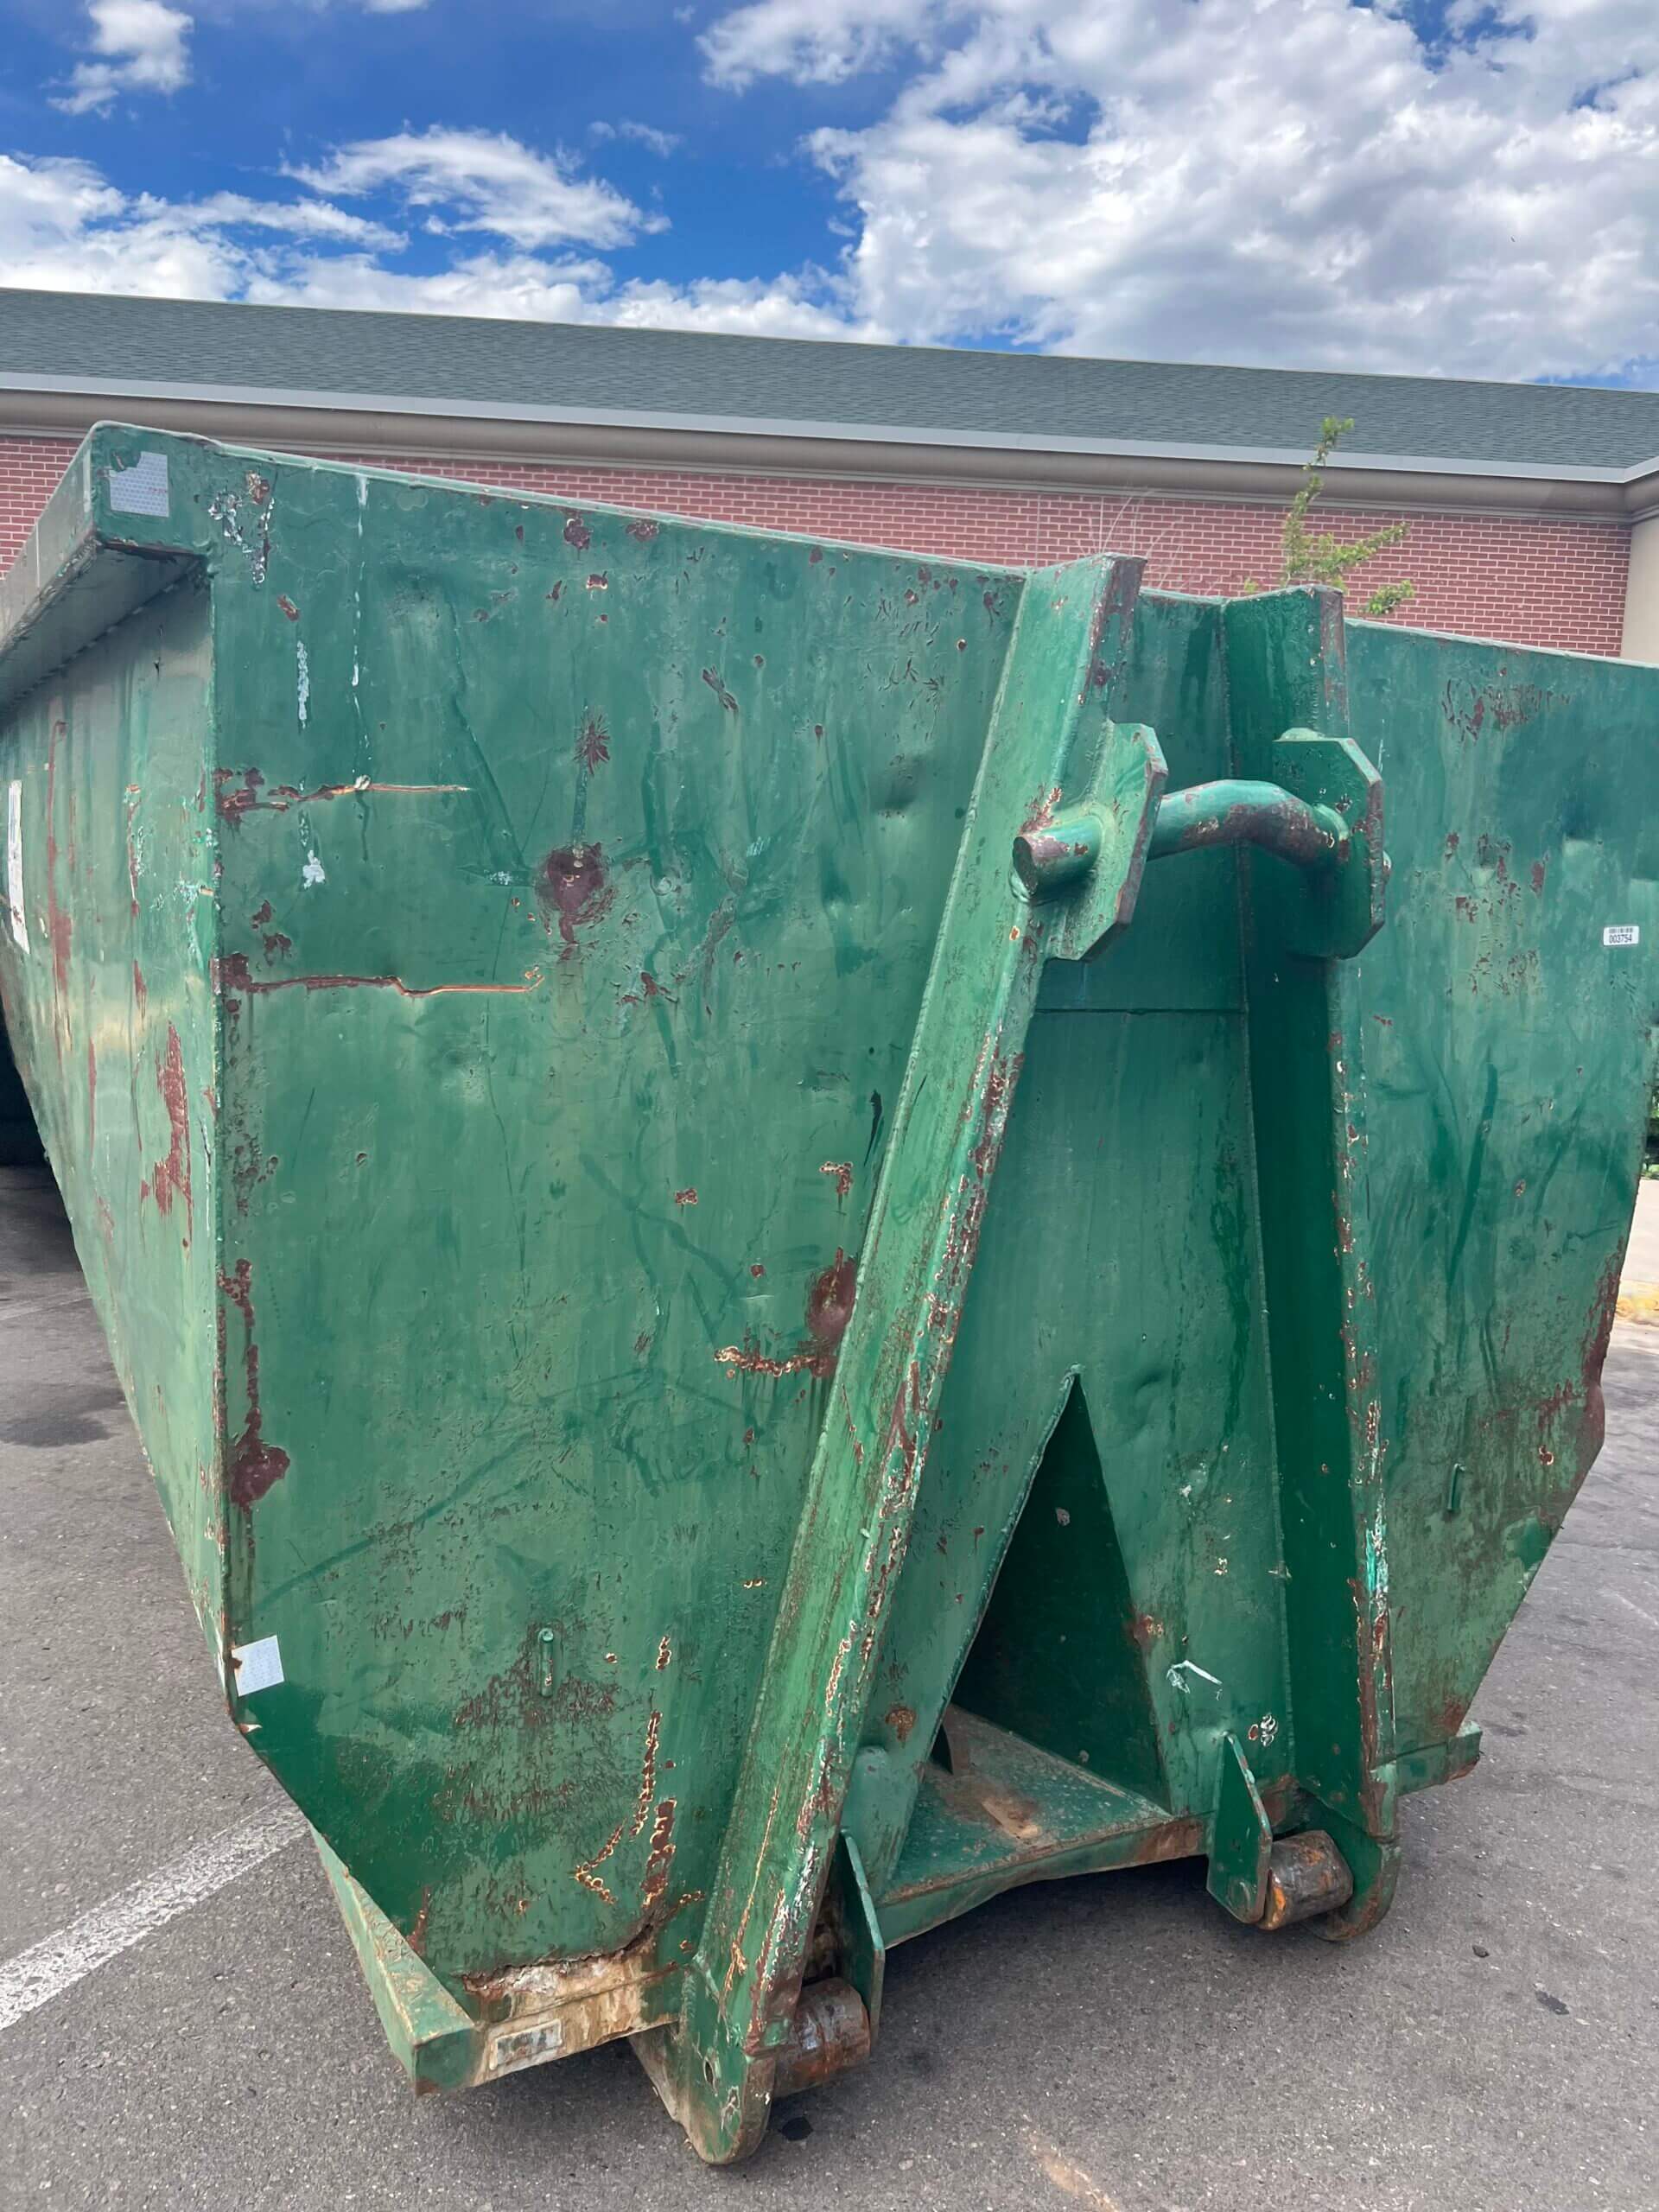 dumpster rental pittsburgh prices